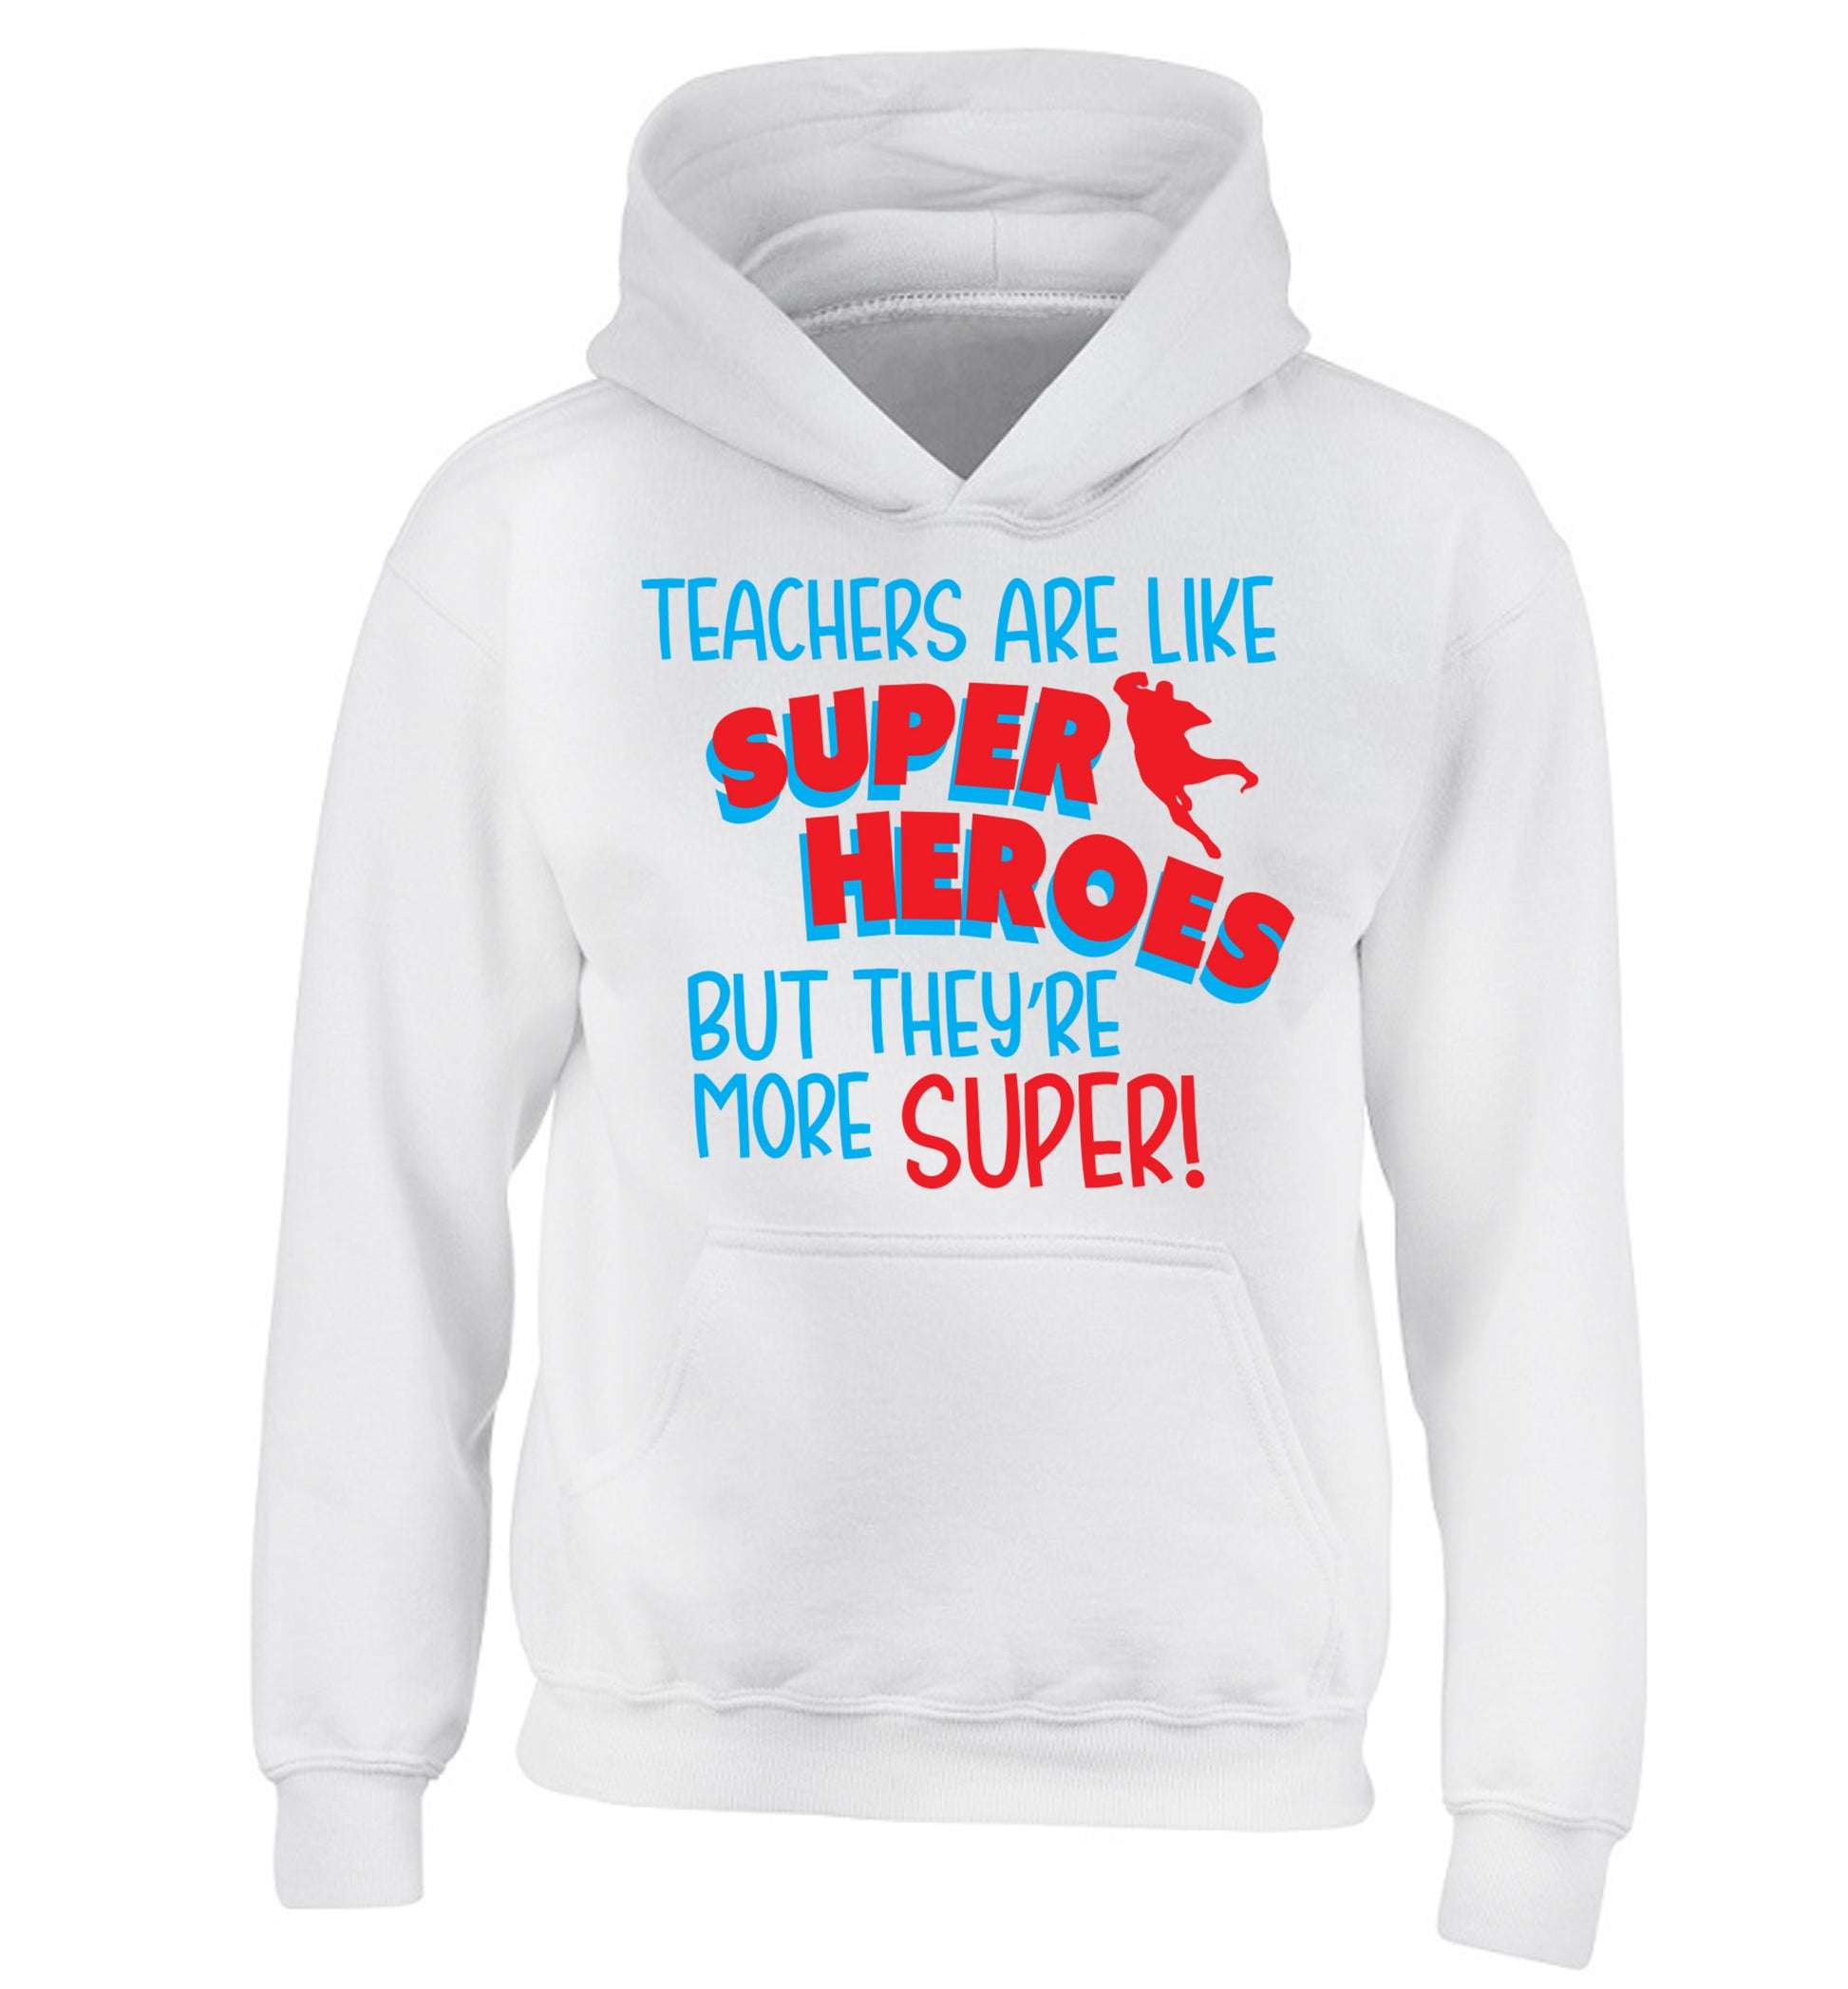 Teachers are like superheros but they're more super children's white hoodie 12-13 Years